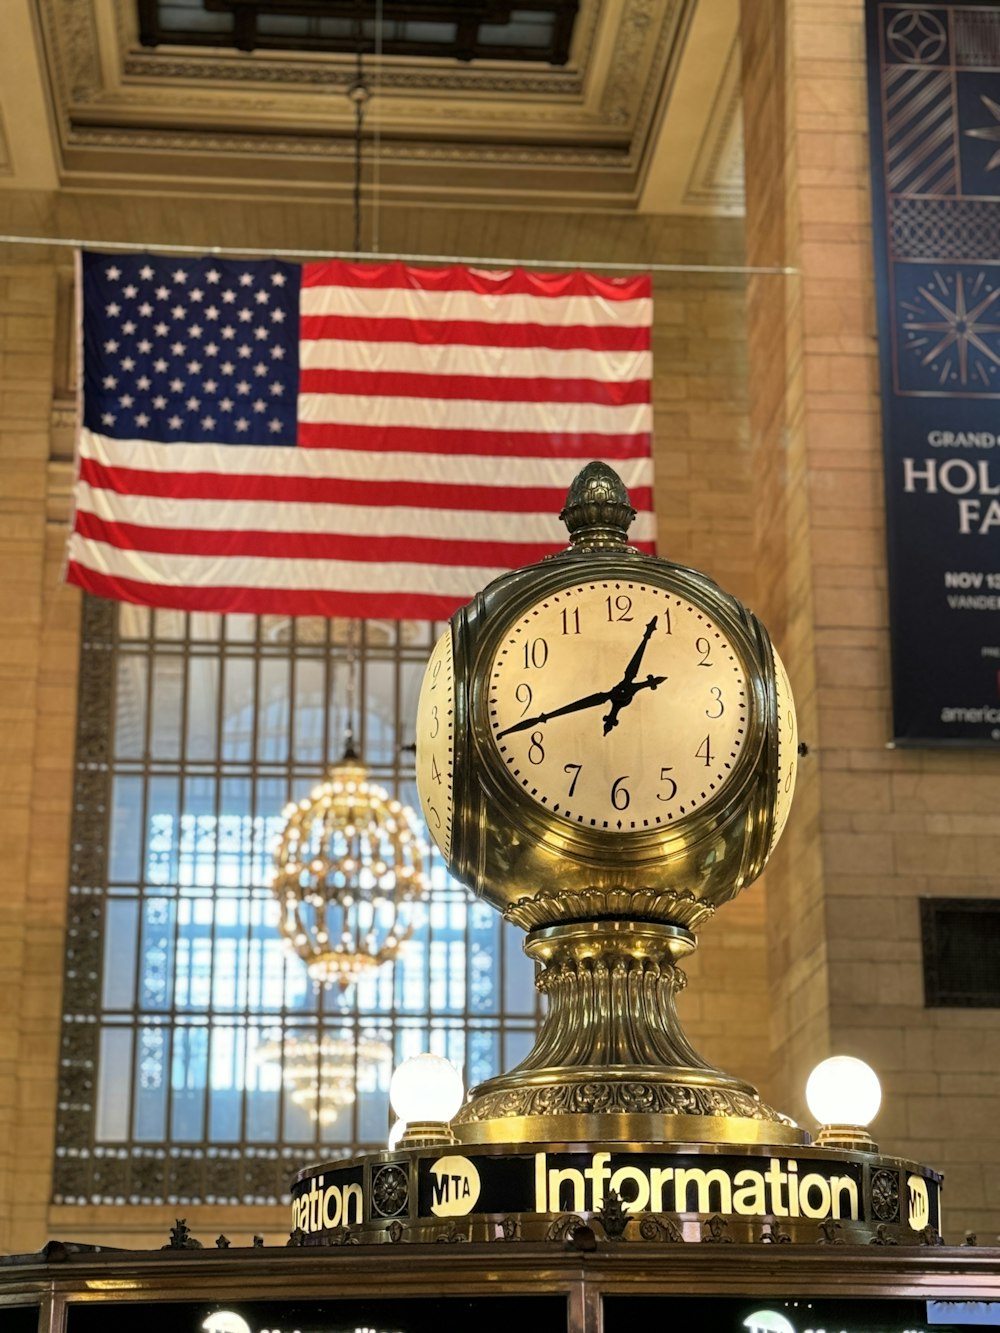 a clock on top of a post in front of an american flag